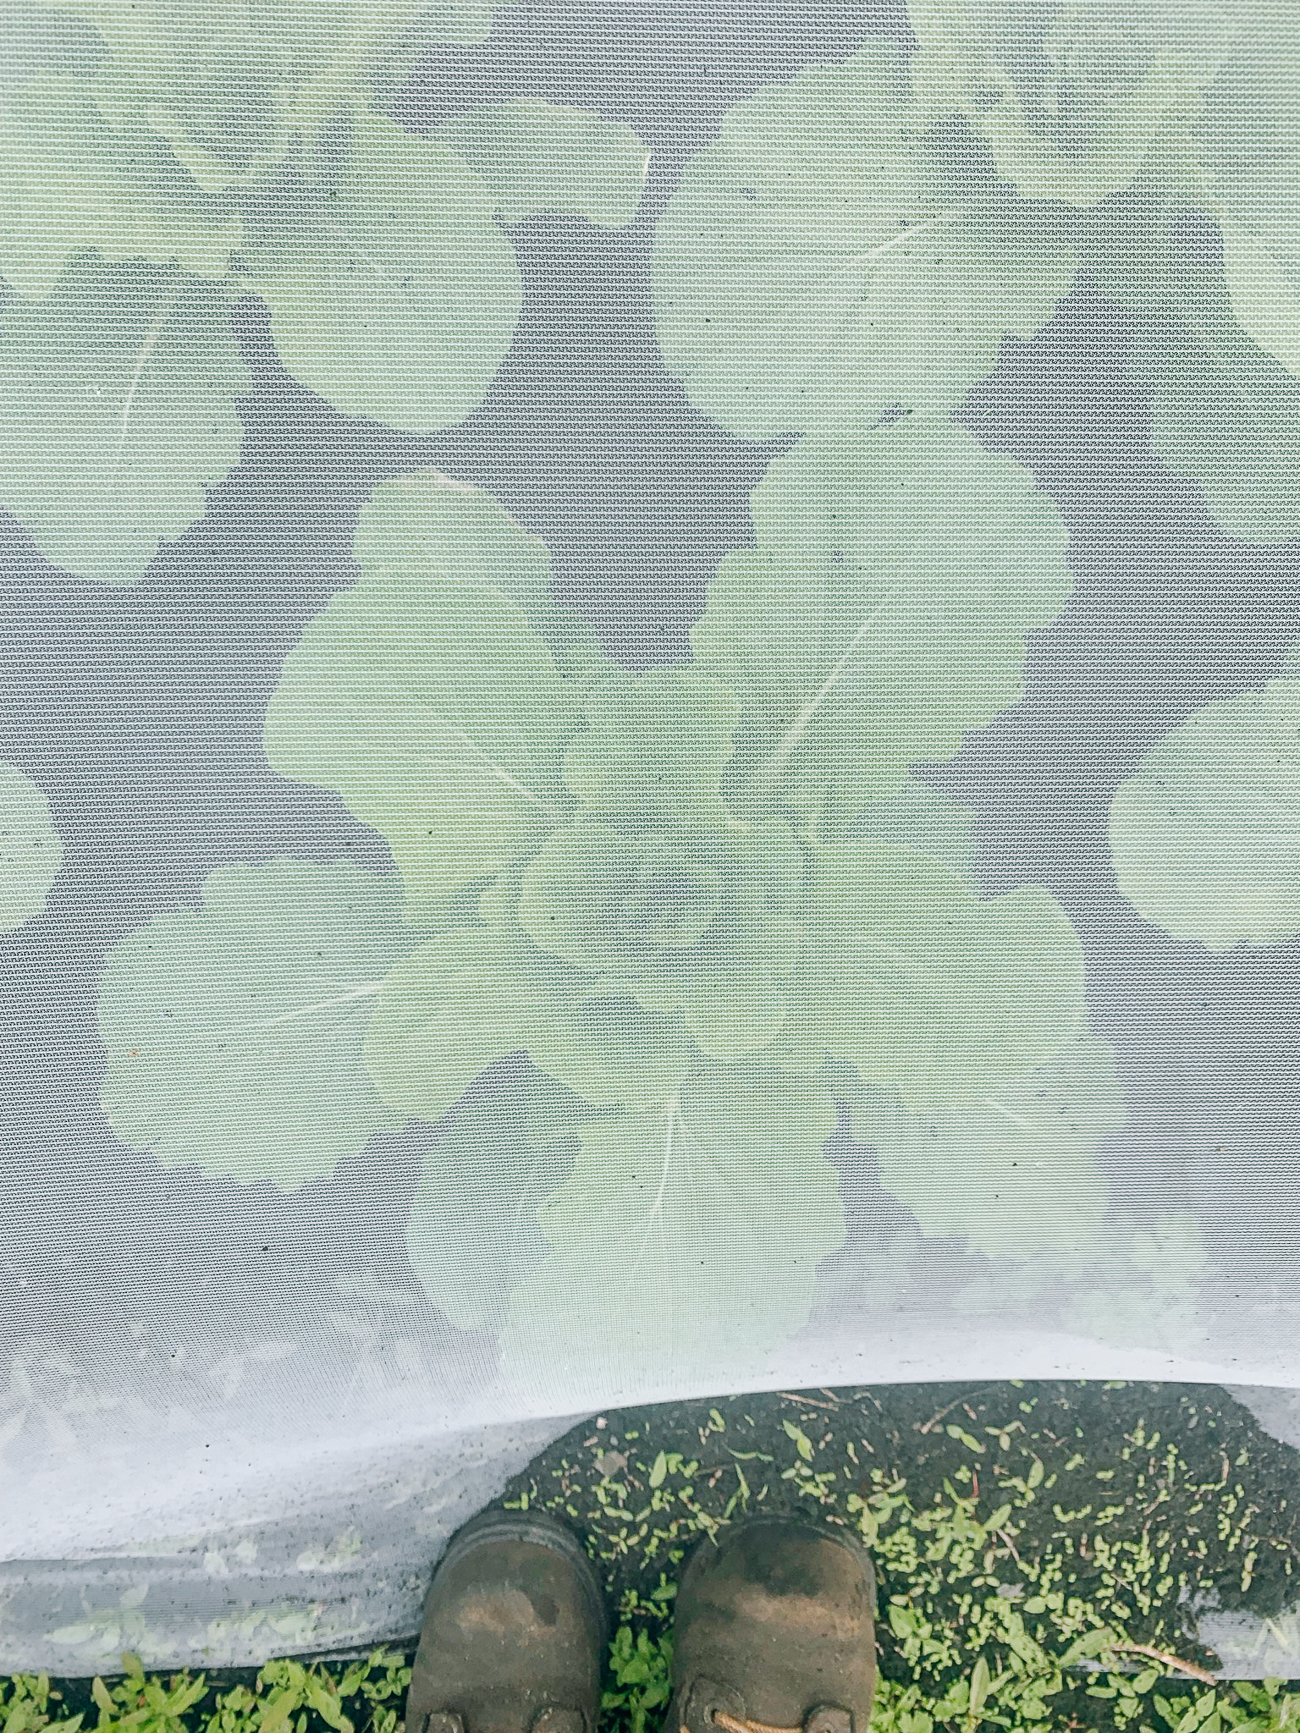 napa cabbage plant protected by insect netting